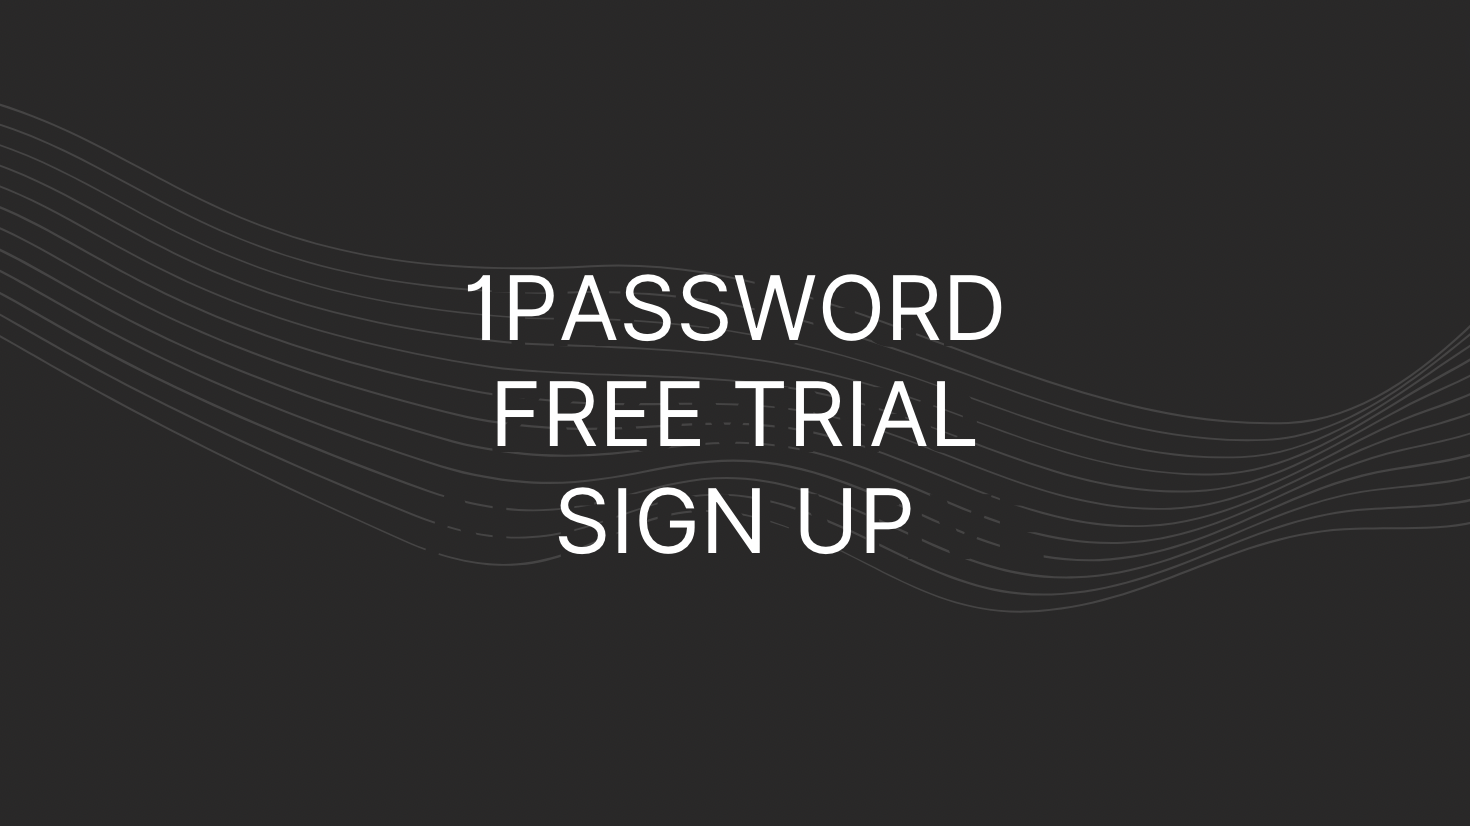 1password free trial sign up